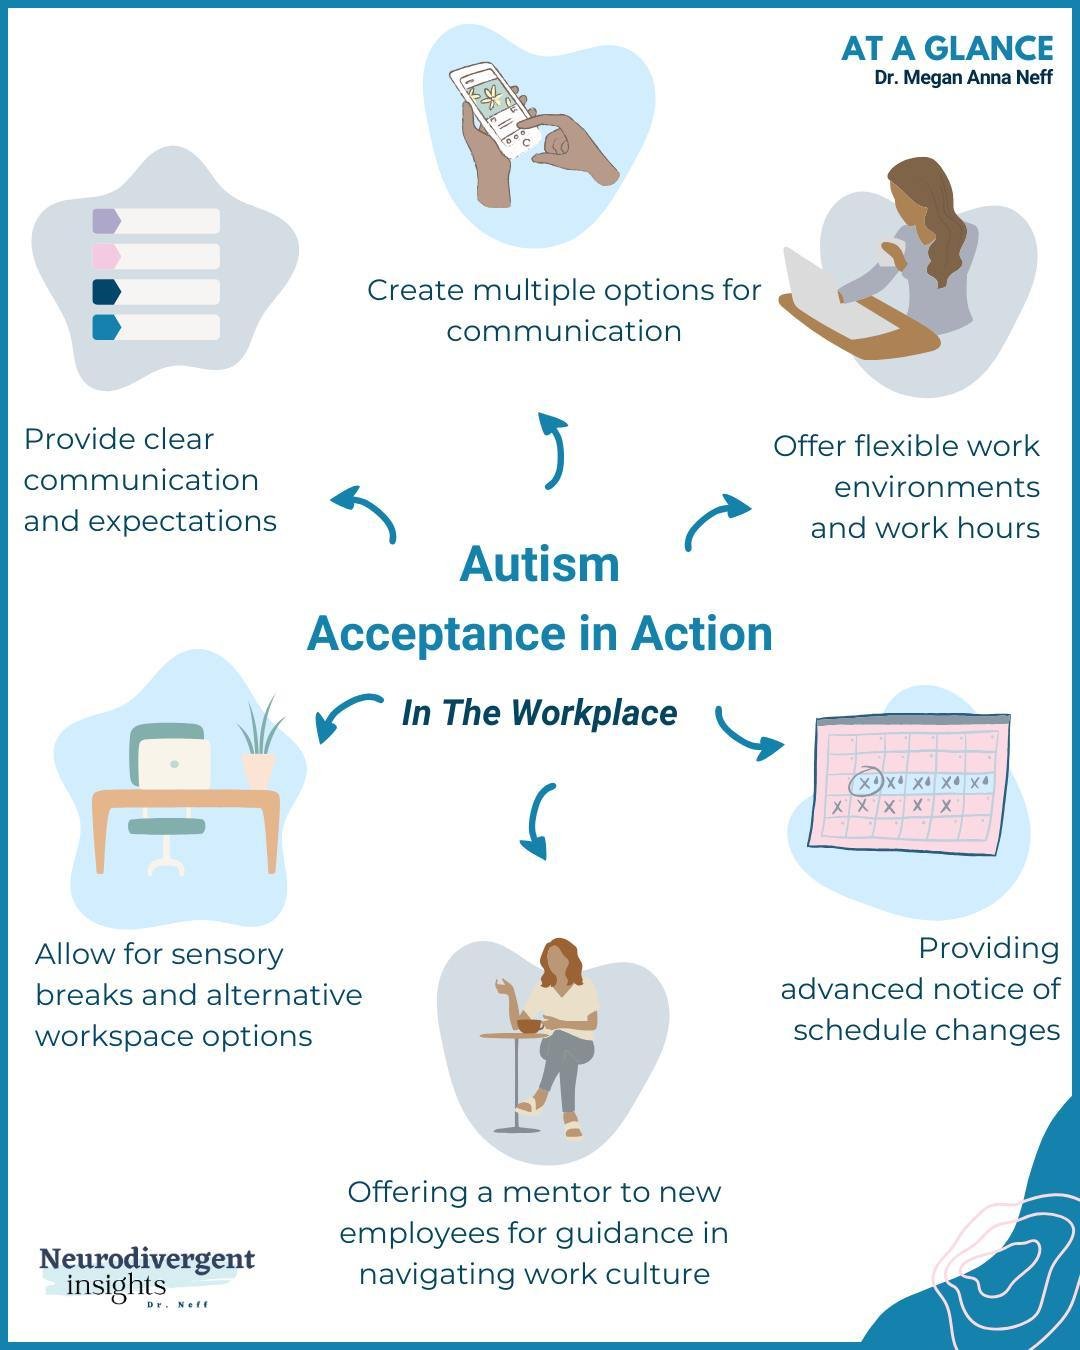 #ConcreteAcceptance: Day 3 of 7 - Autism Acceptance in the Workplace⁠
⁠
Continuing our series of breaking down Autism Acceptance into concrete action---today we turn our attention to the workplace. ⁠
⁠
Inclusion means more than just employment opport